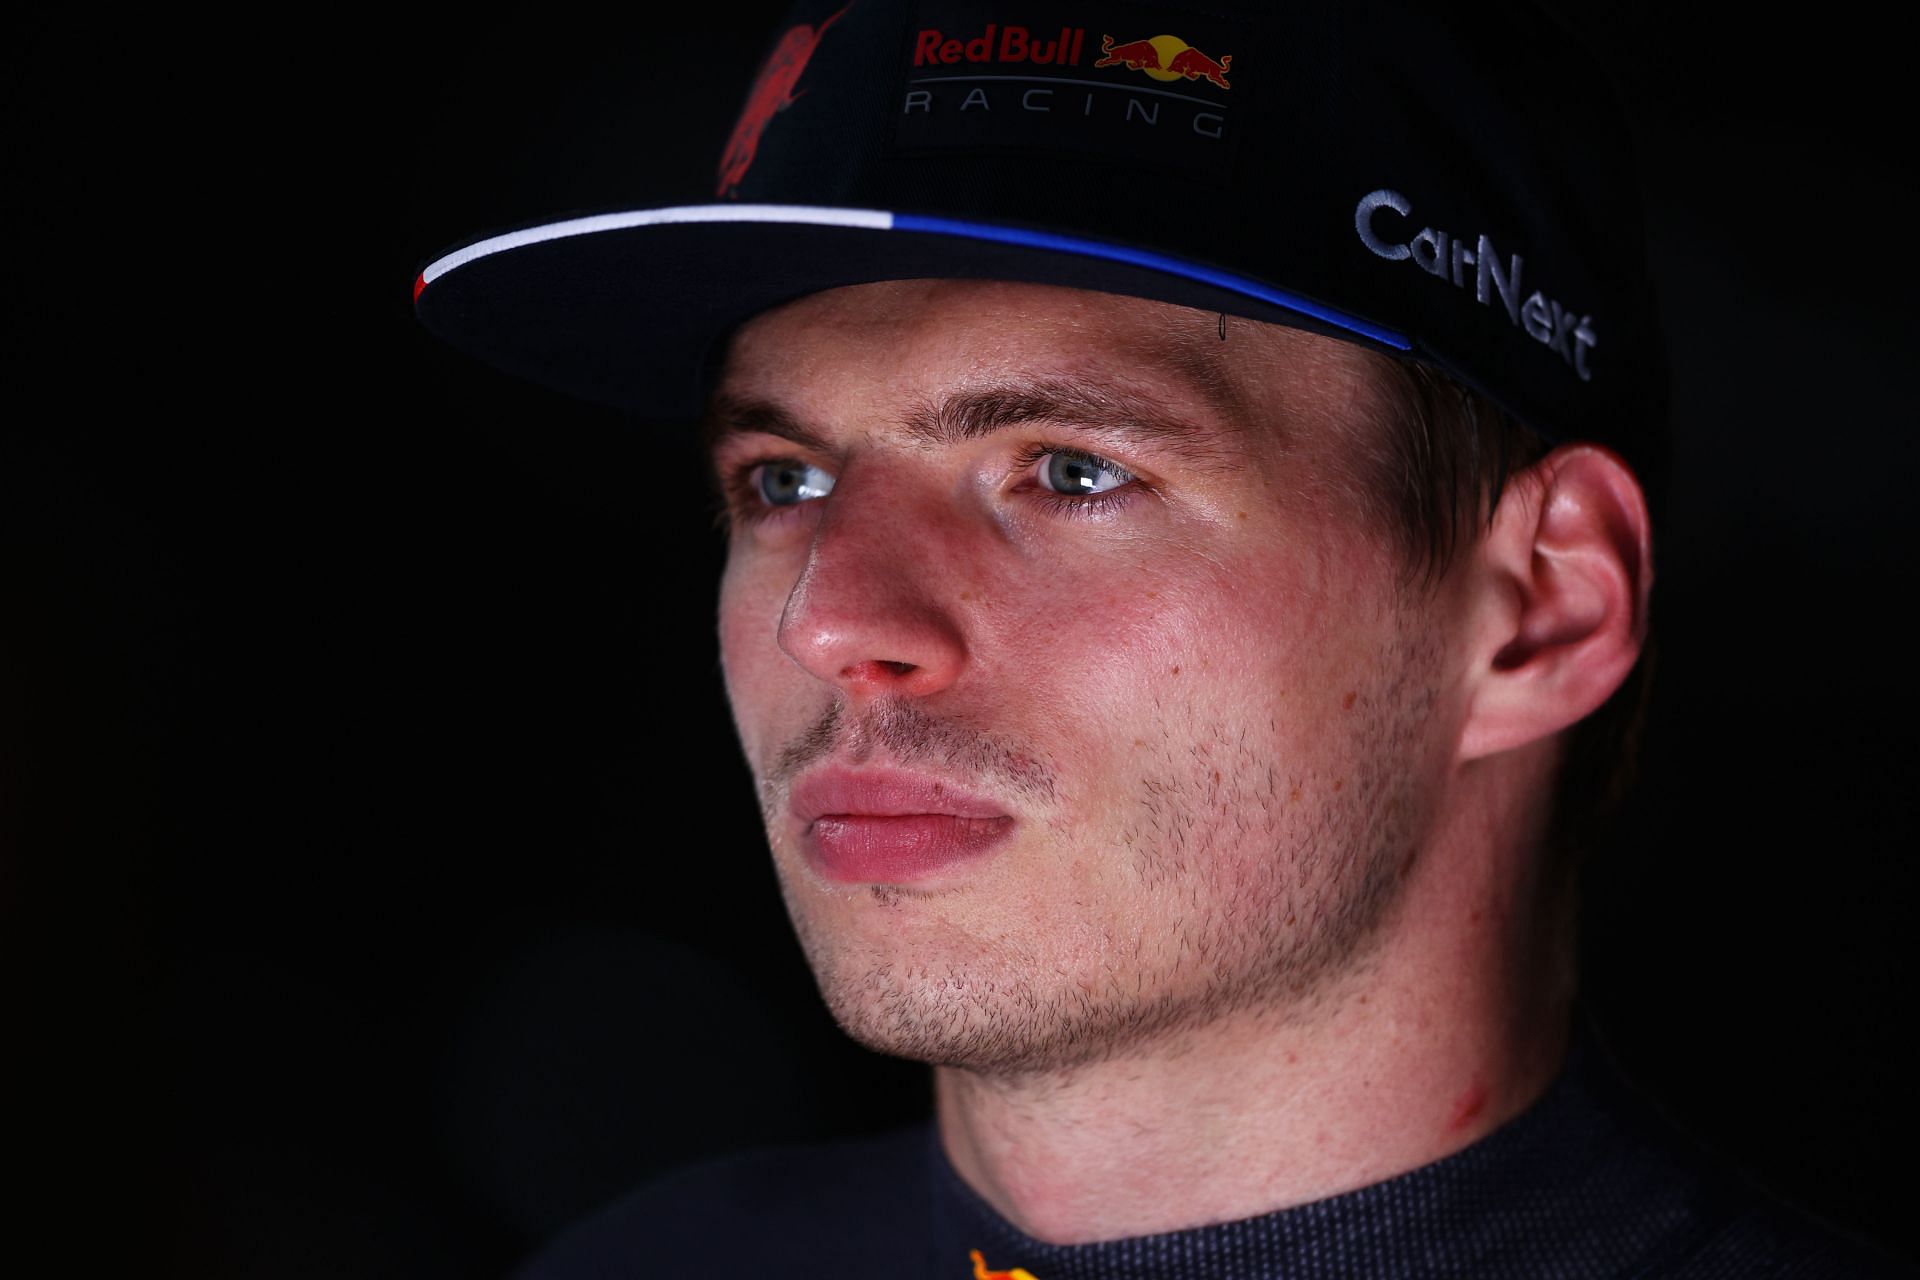 Max Verstappen talks to the media in the Paddock after qualifying ahead of the F1 Grand Prix of Azerbaijan at Baku City Circuit on June 11, 2022 in Baku, Azerbaijan. (Photo by Clive Rose/Getty Images)